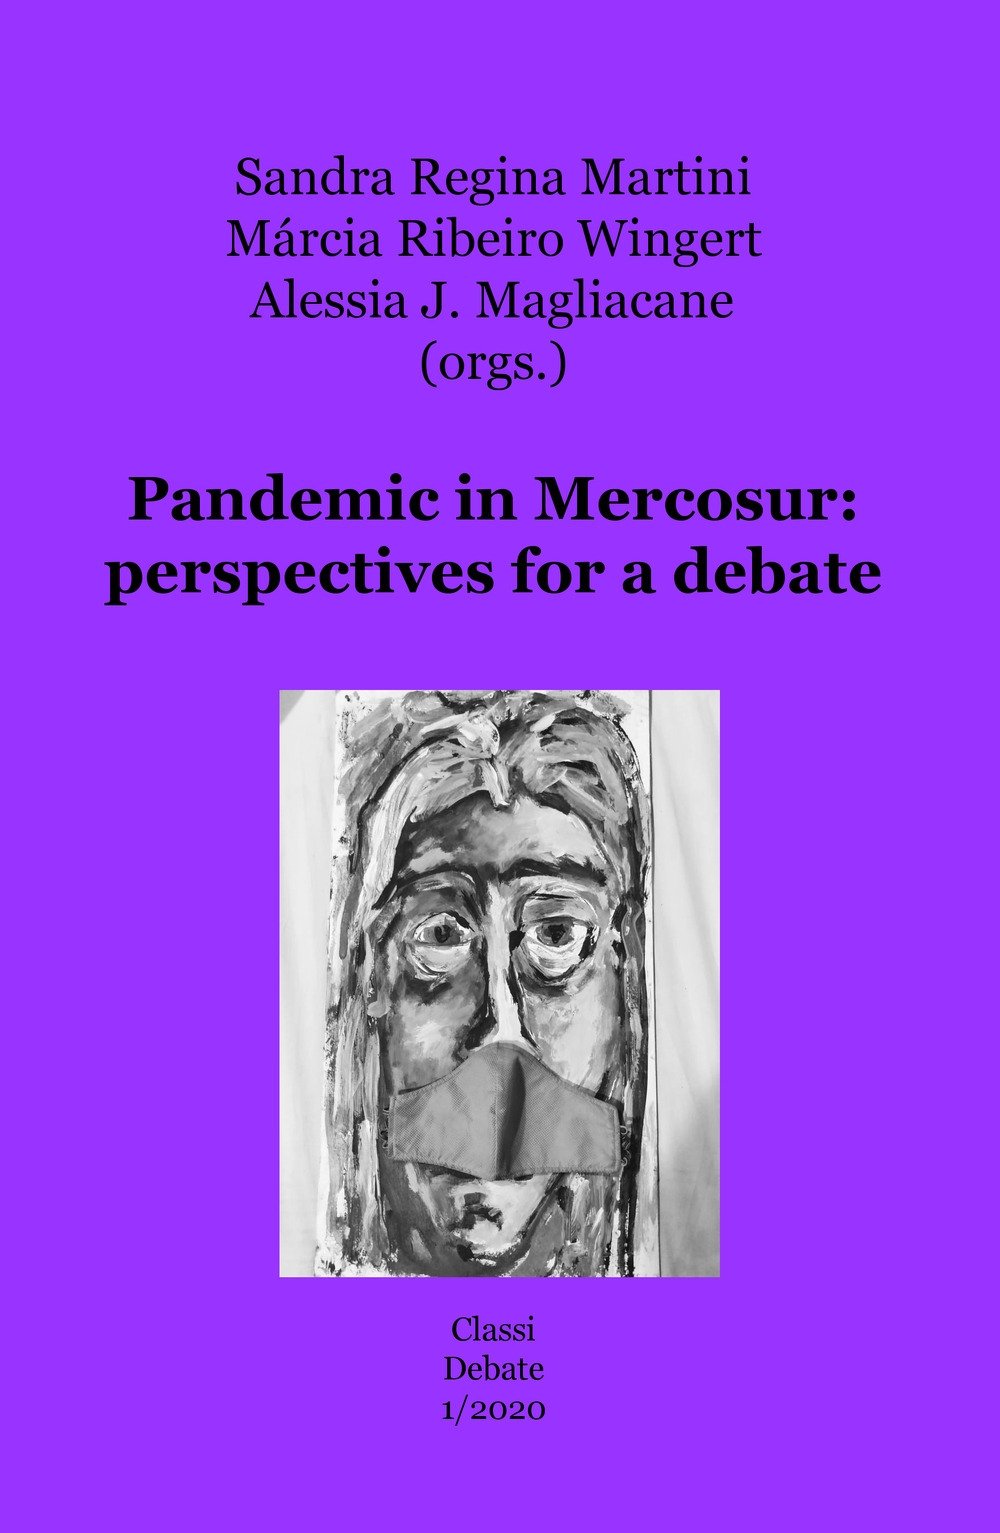 Pandemic in Mercosur: perspectives for a debate